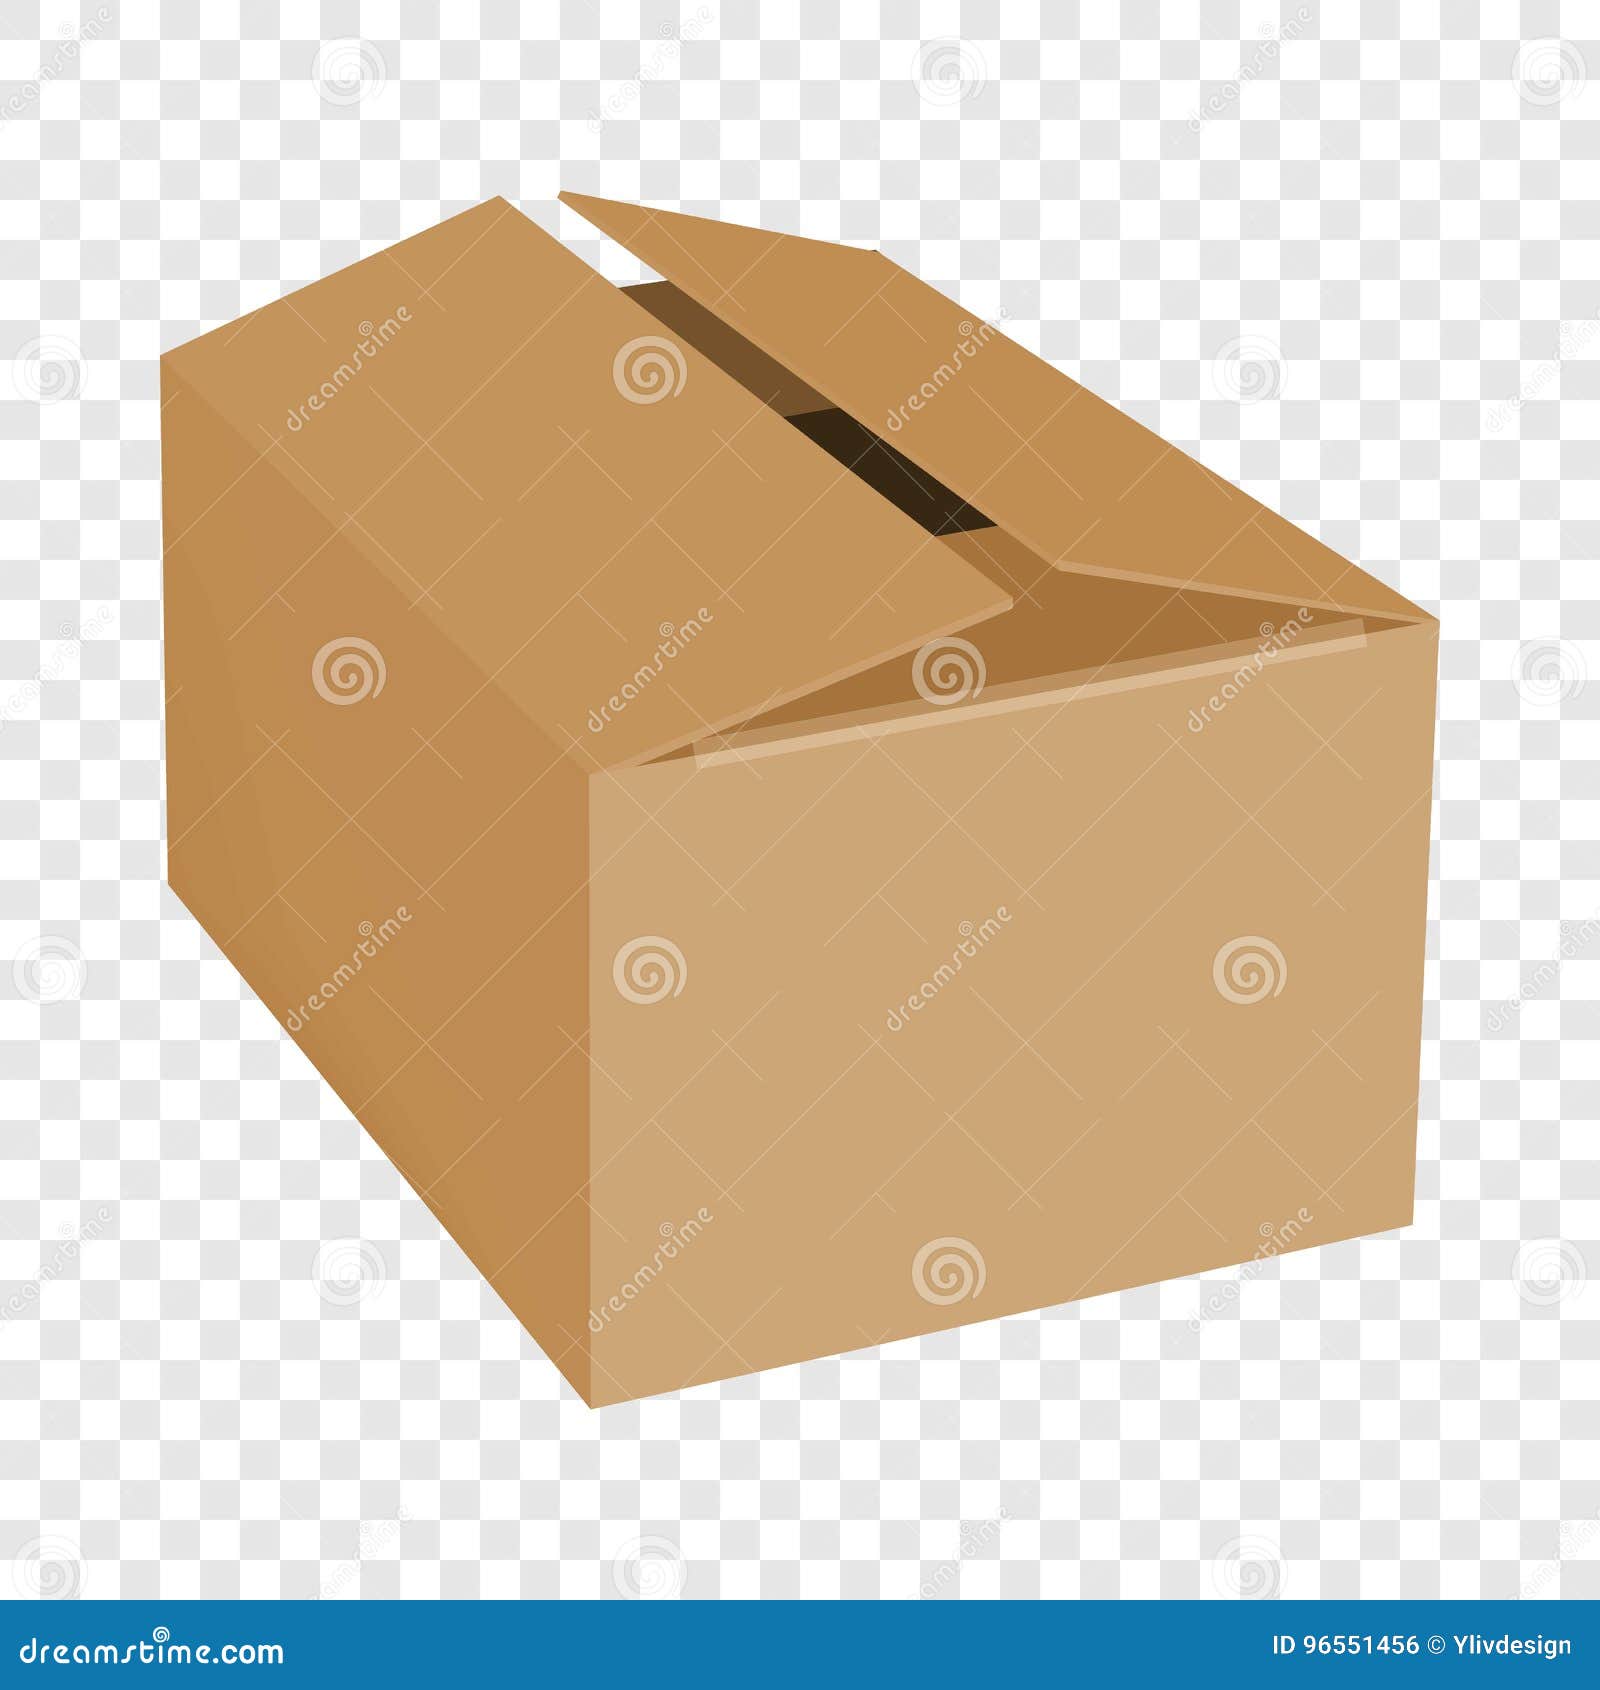 Download Empty Box Mockup, Realistic Style Stock Vector ...